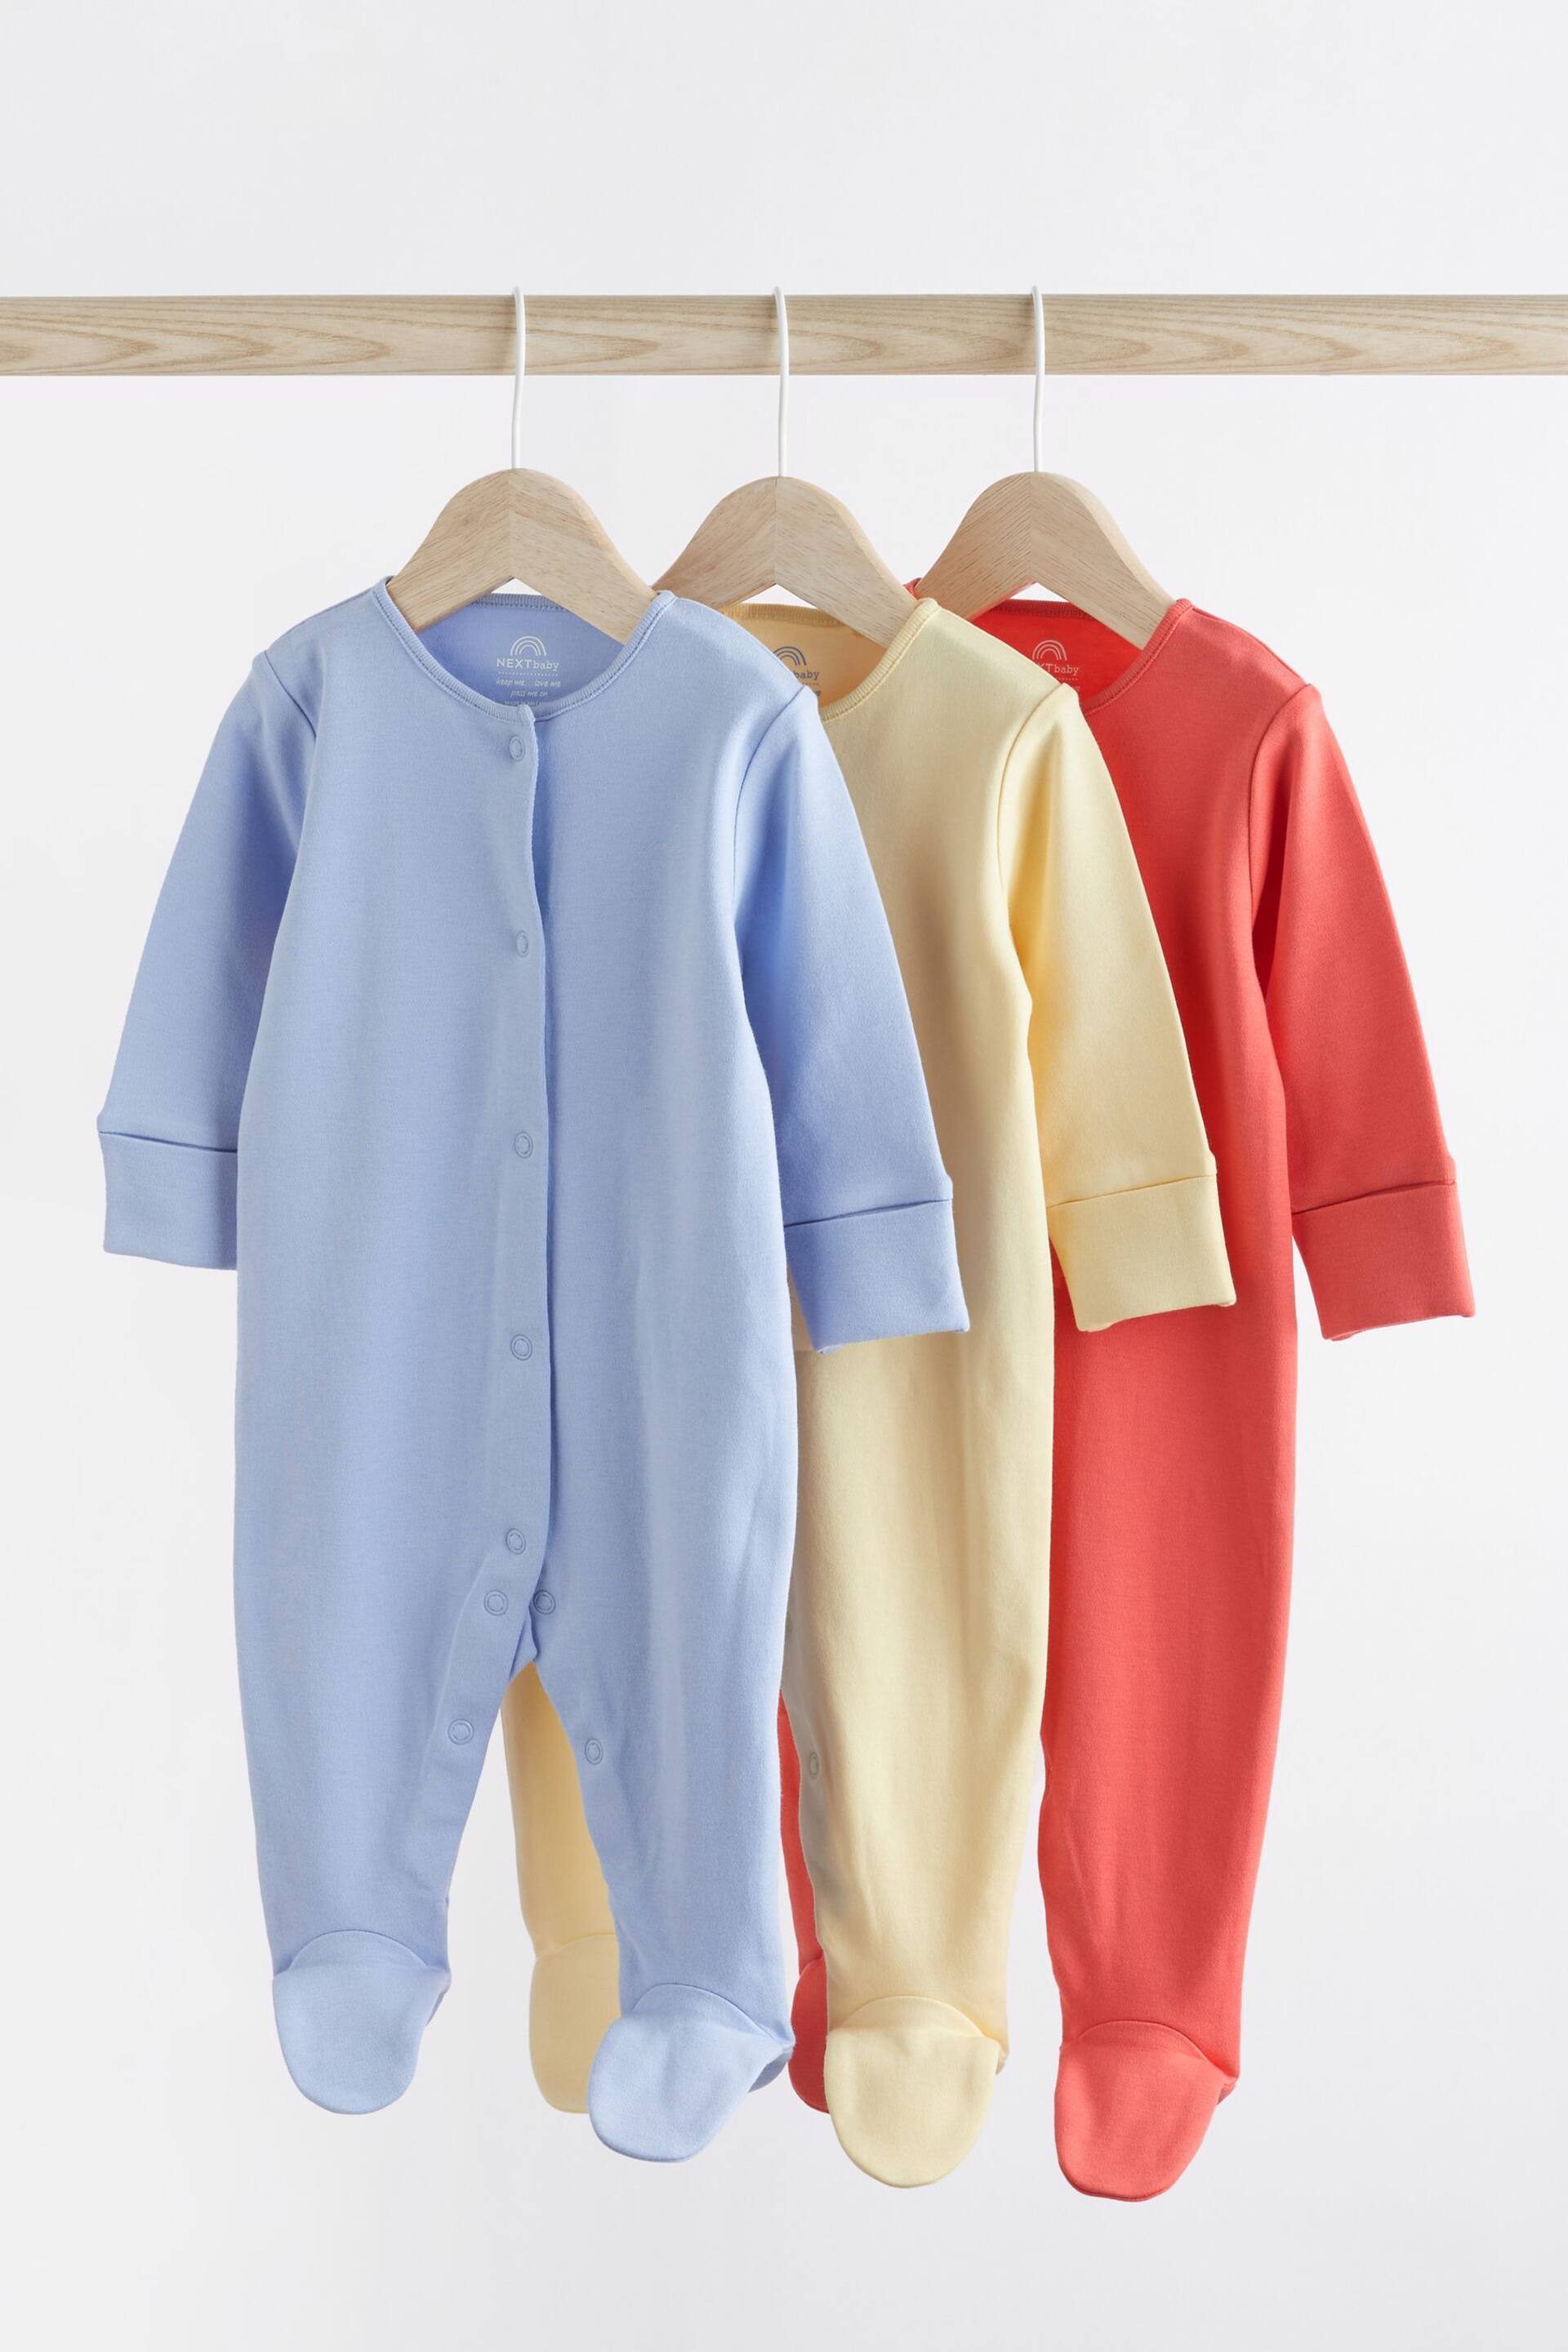 Bright 3 Pack Cotton Baby Sleepsuits (0-2yrs) - Image 1 of 11